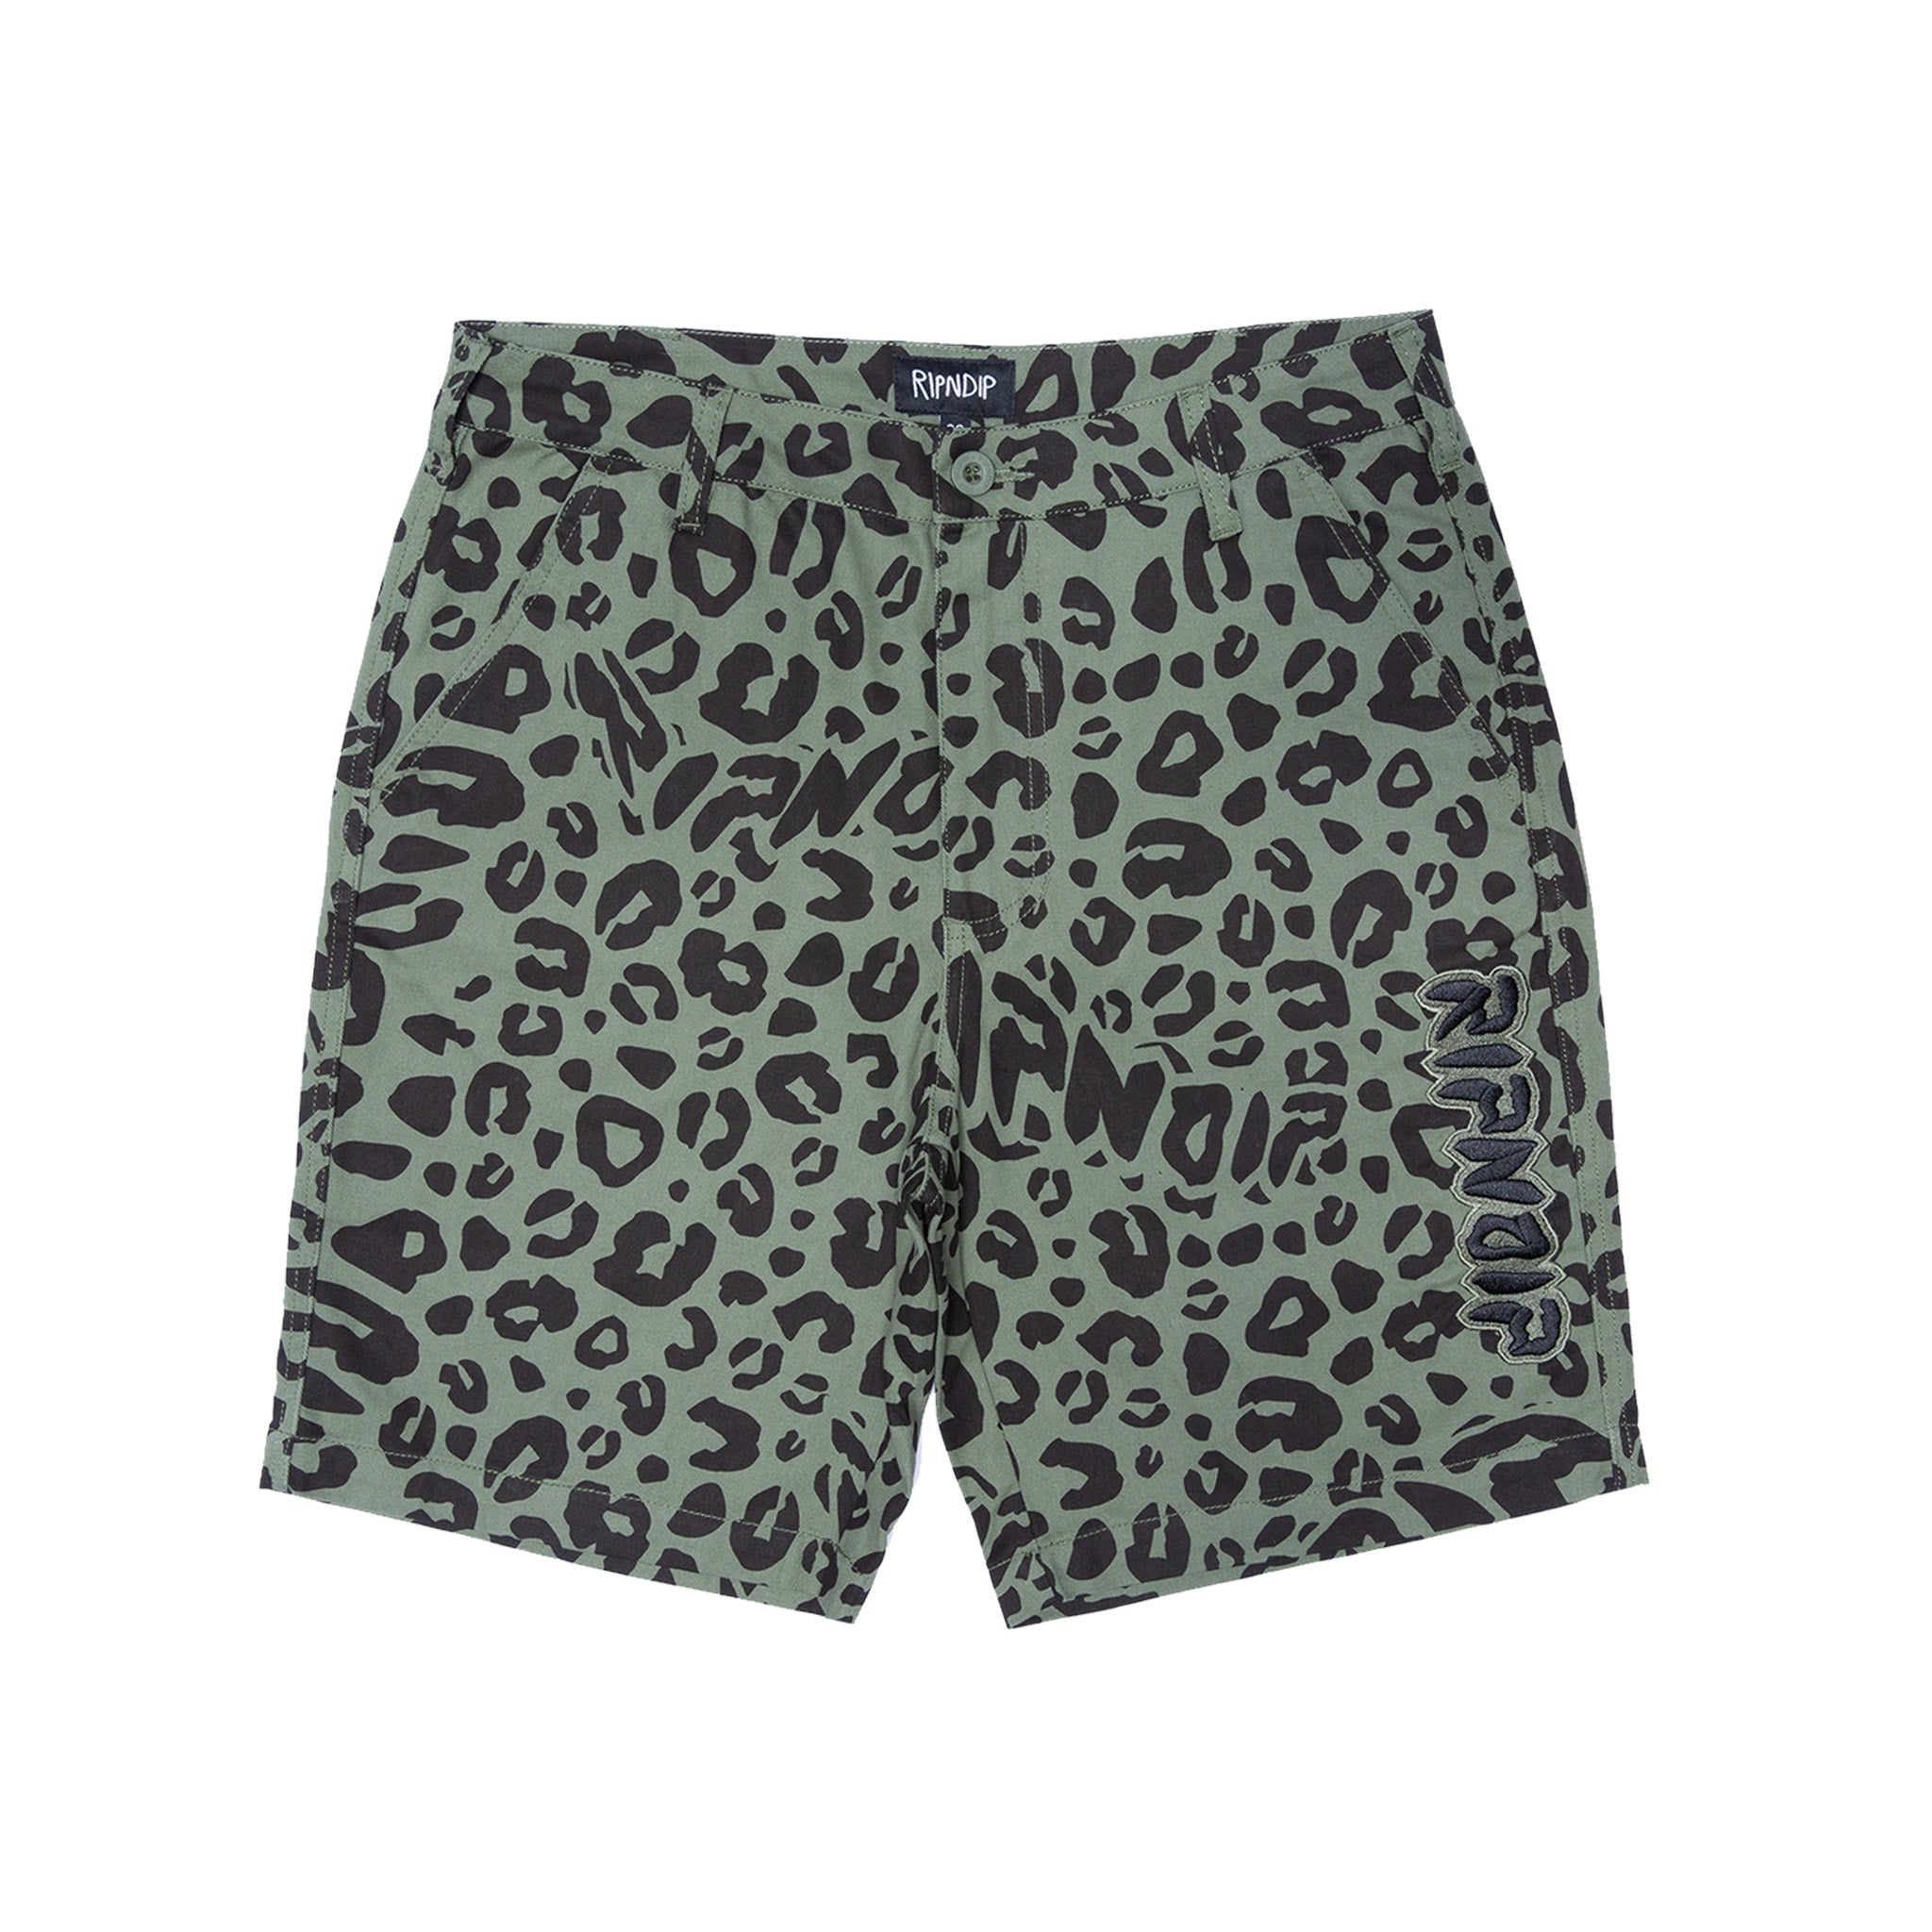 RIPNDIP Spotted Cotton Twill Shorts (Olive)